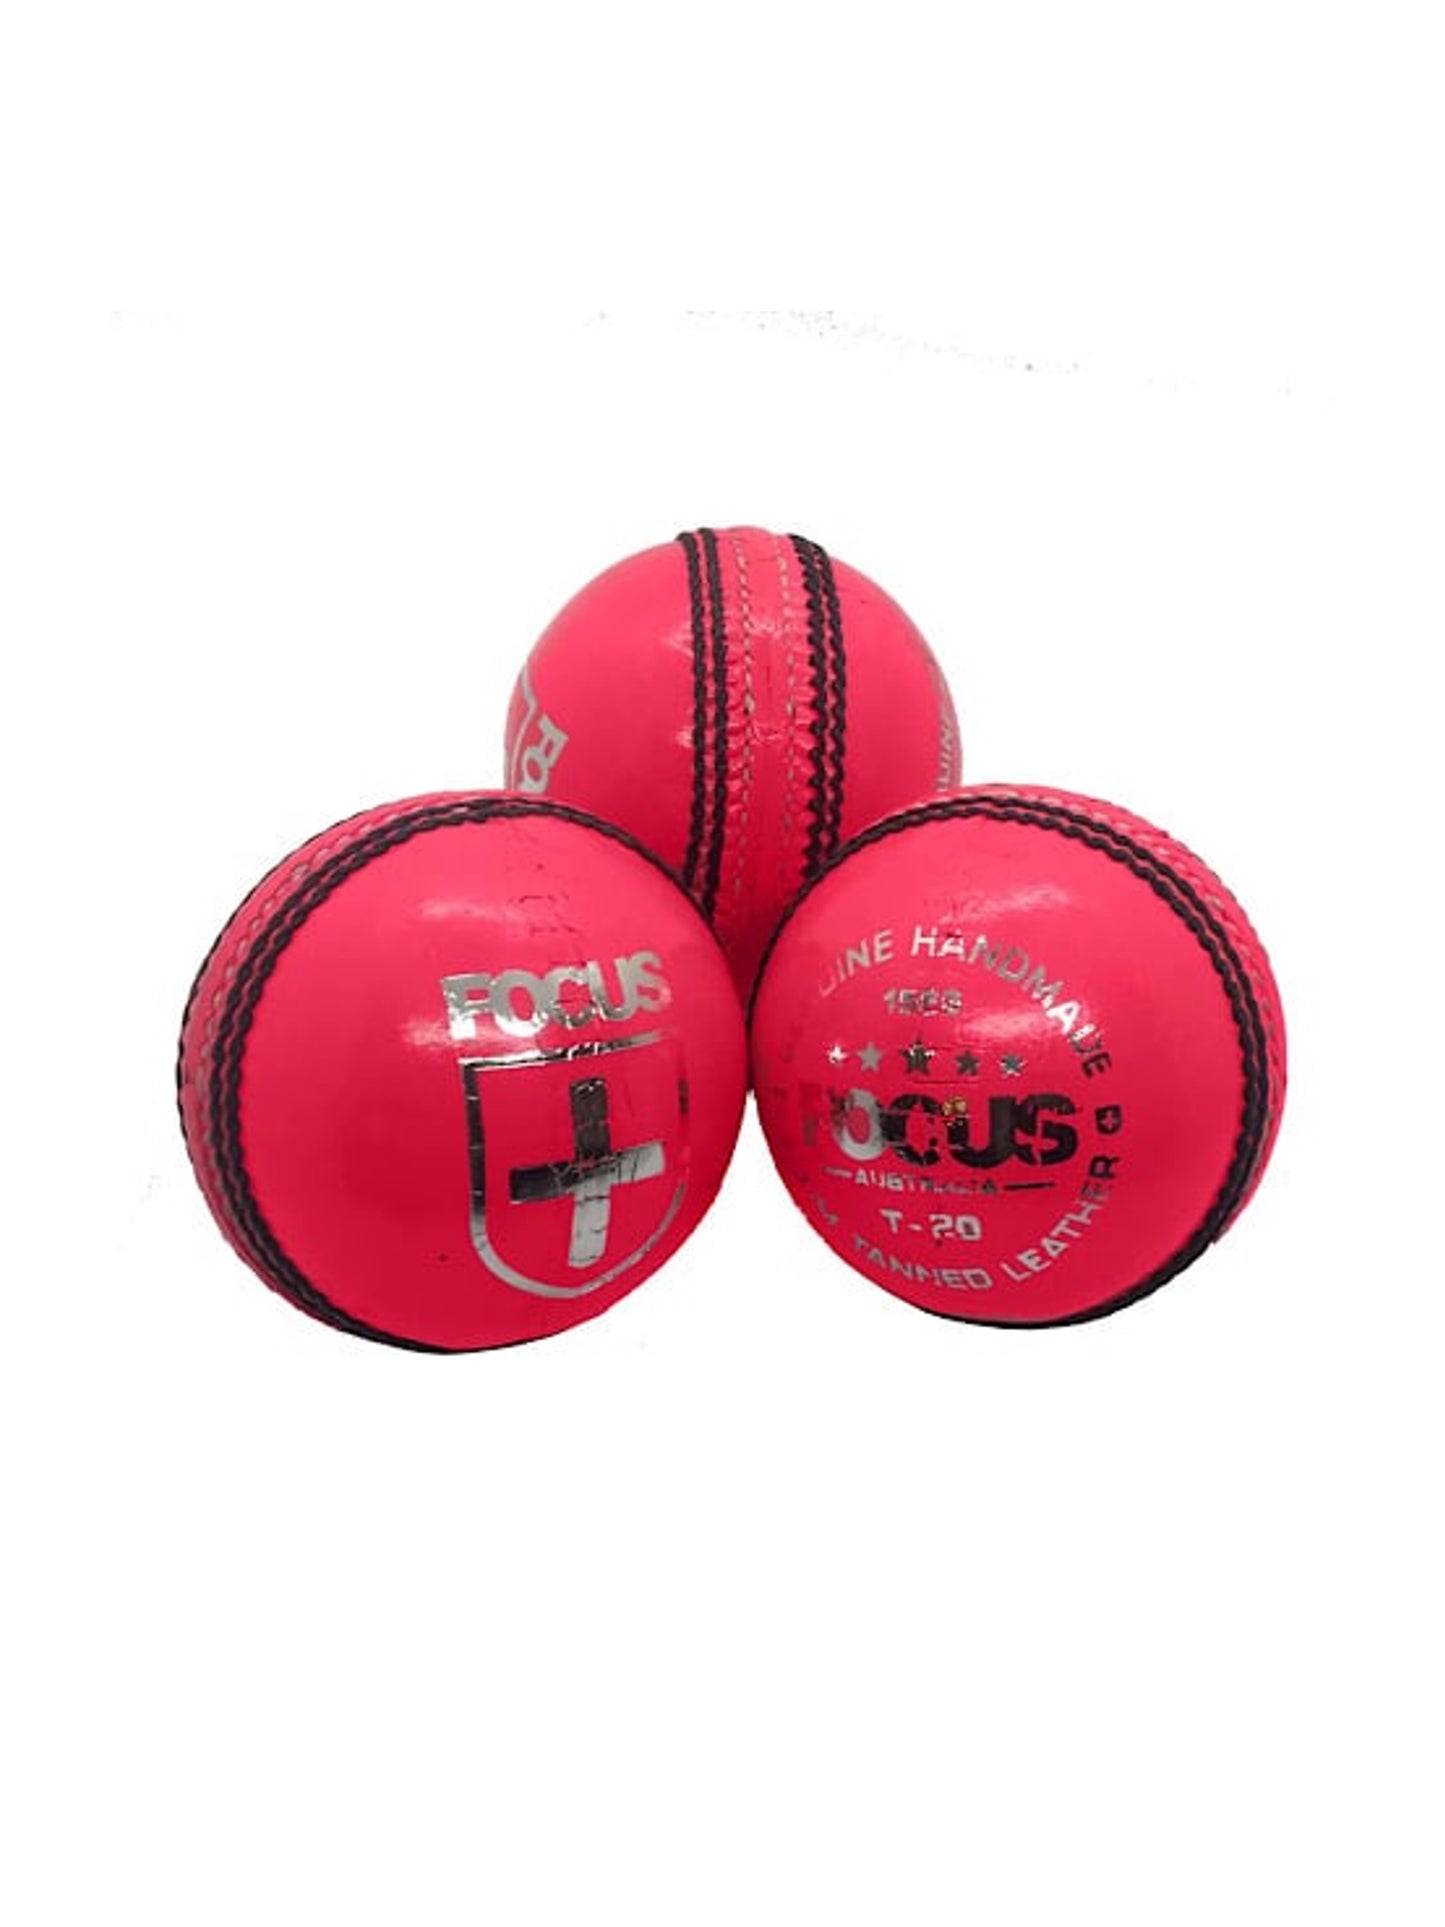 Focus Limited Cricket Ball